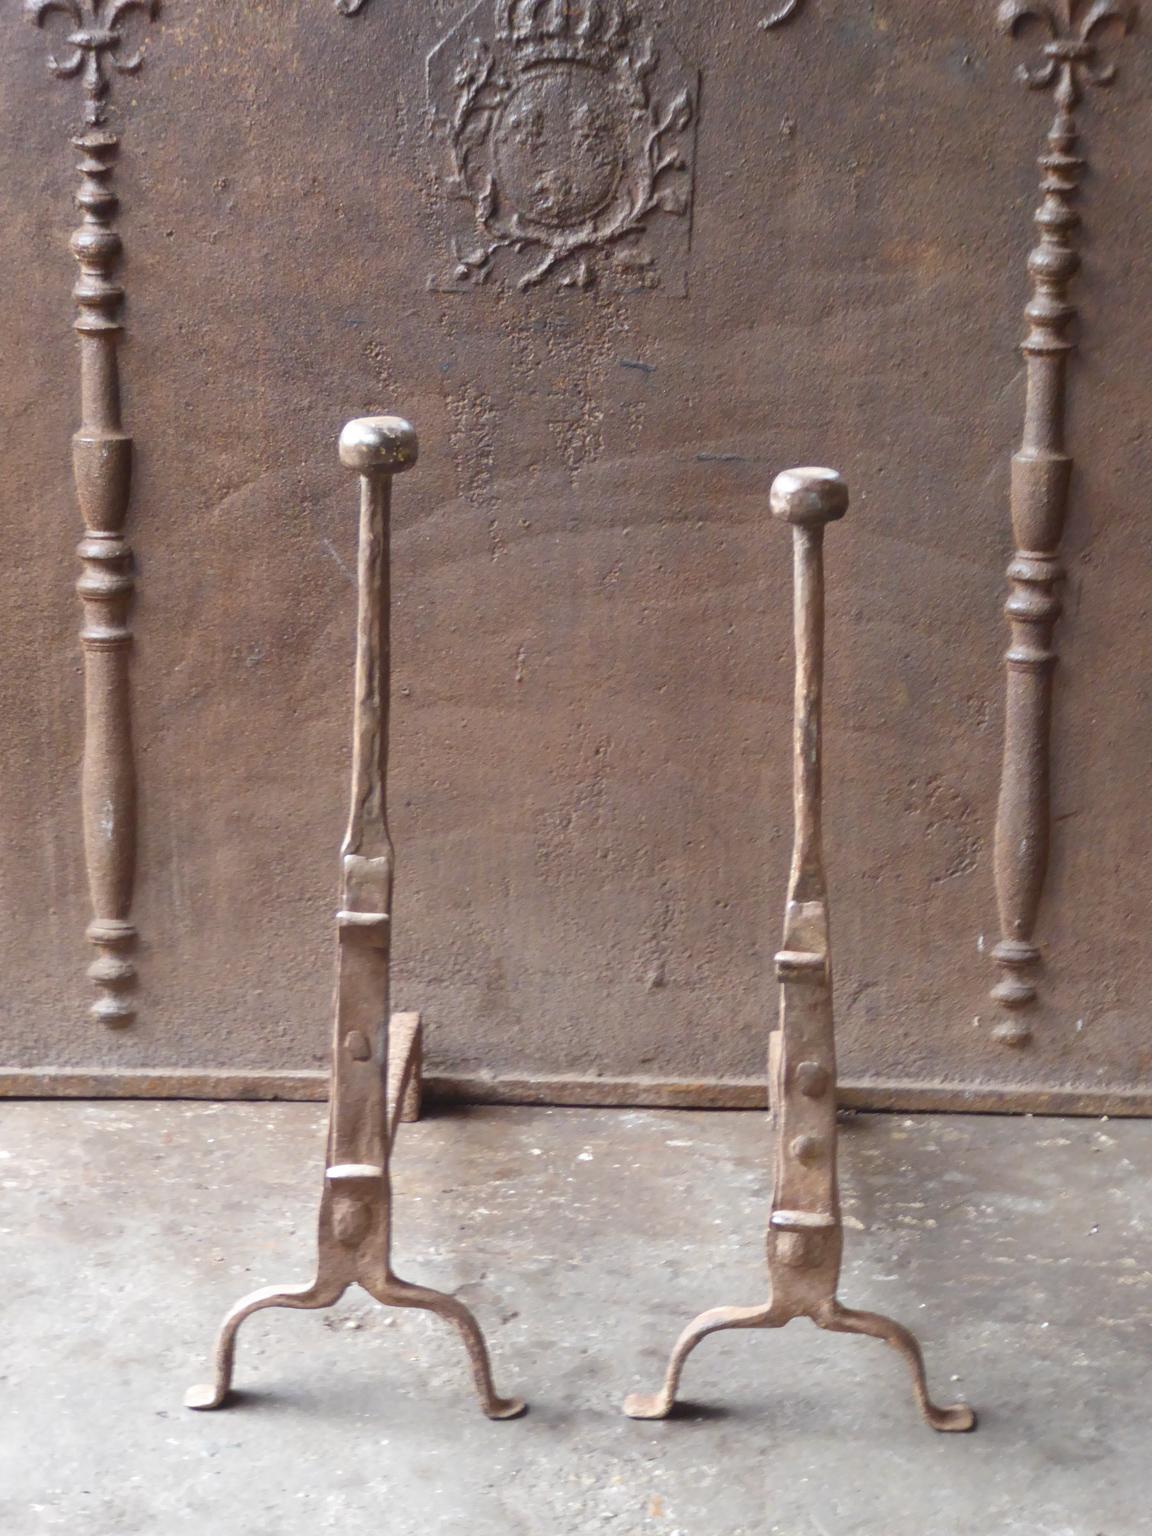 17th century French andirons made of wrought iron. The style of the andirons is gothic. The andirons have spit hooks to grill food. They are in a good condition.